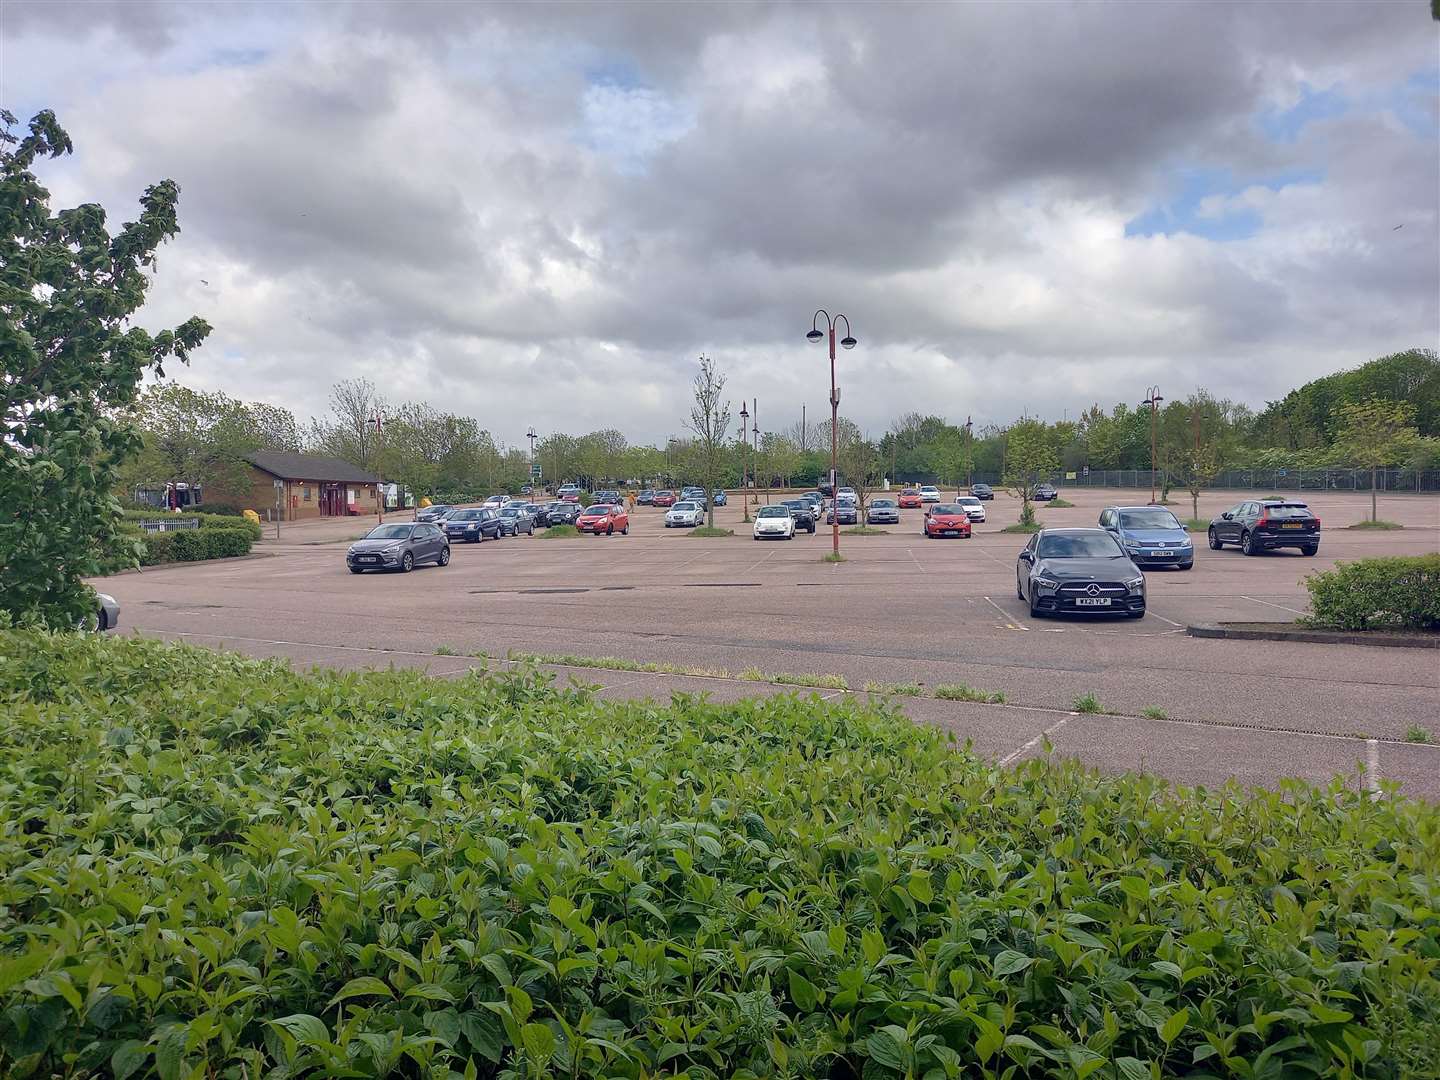 Wincheap park and ride expansion plans are currently on hold